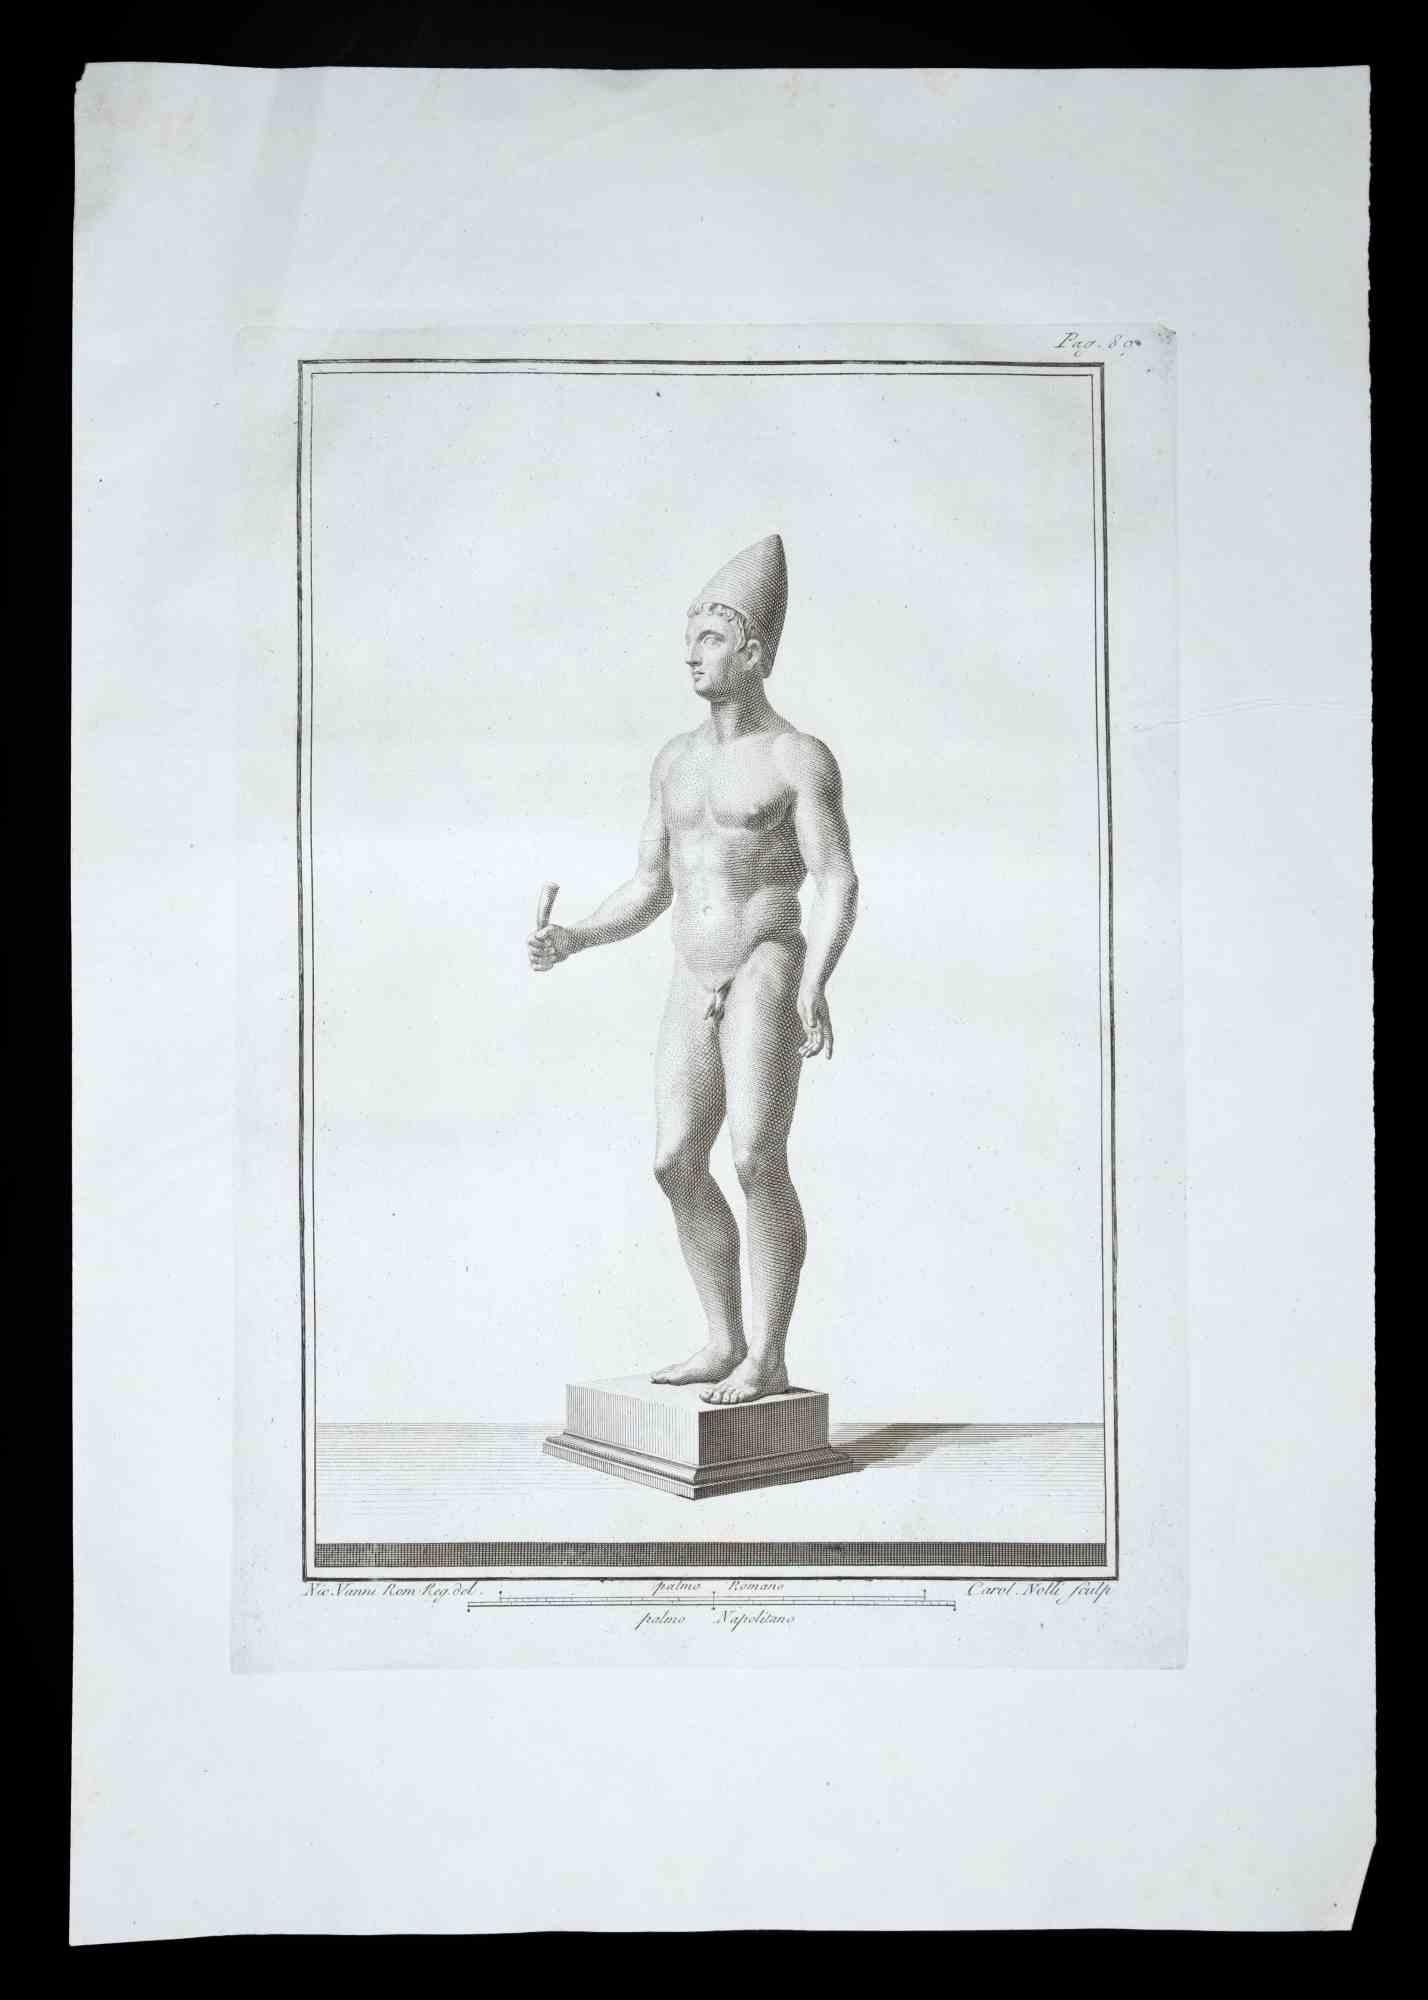 Ancient Roman statue, from the series "Antiquities of Herculaneum", is an original etching on paper realized by Carol Nolli in the 18th century.

Signed on the plate, on the lower right.

Good conditions.

The etching belongs to the print suite